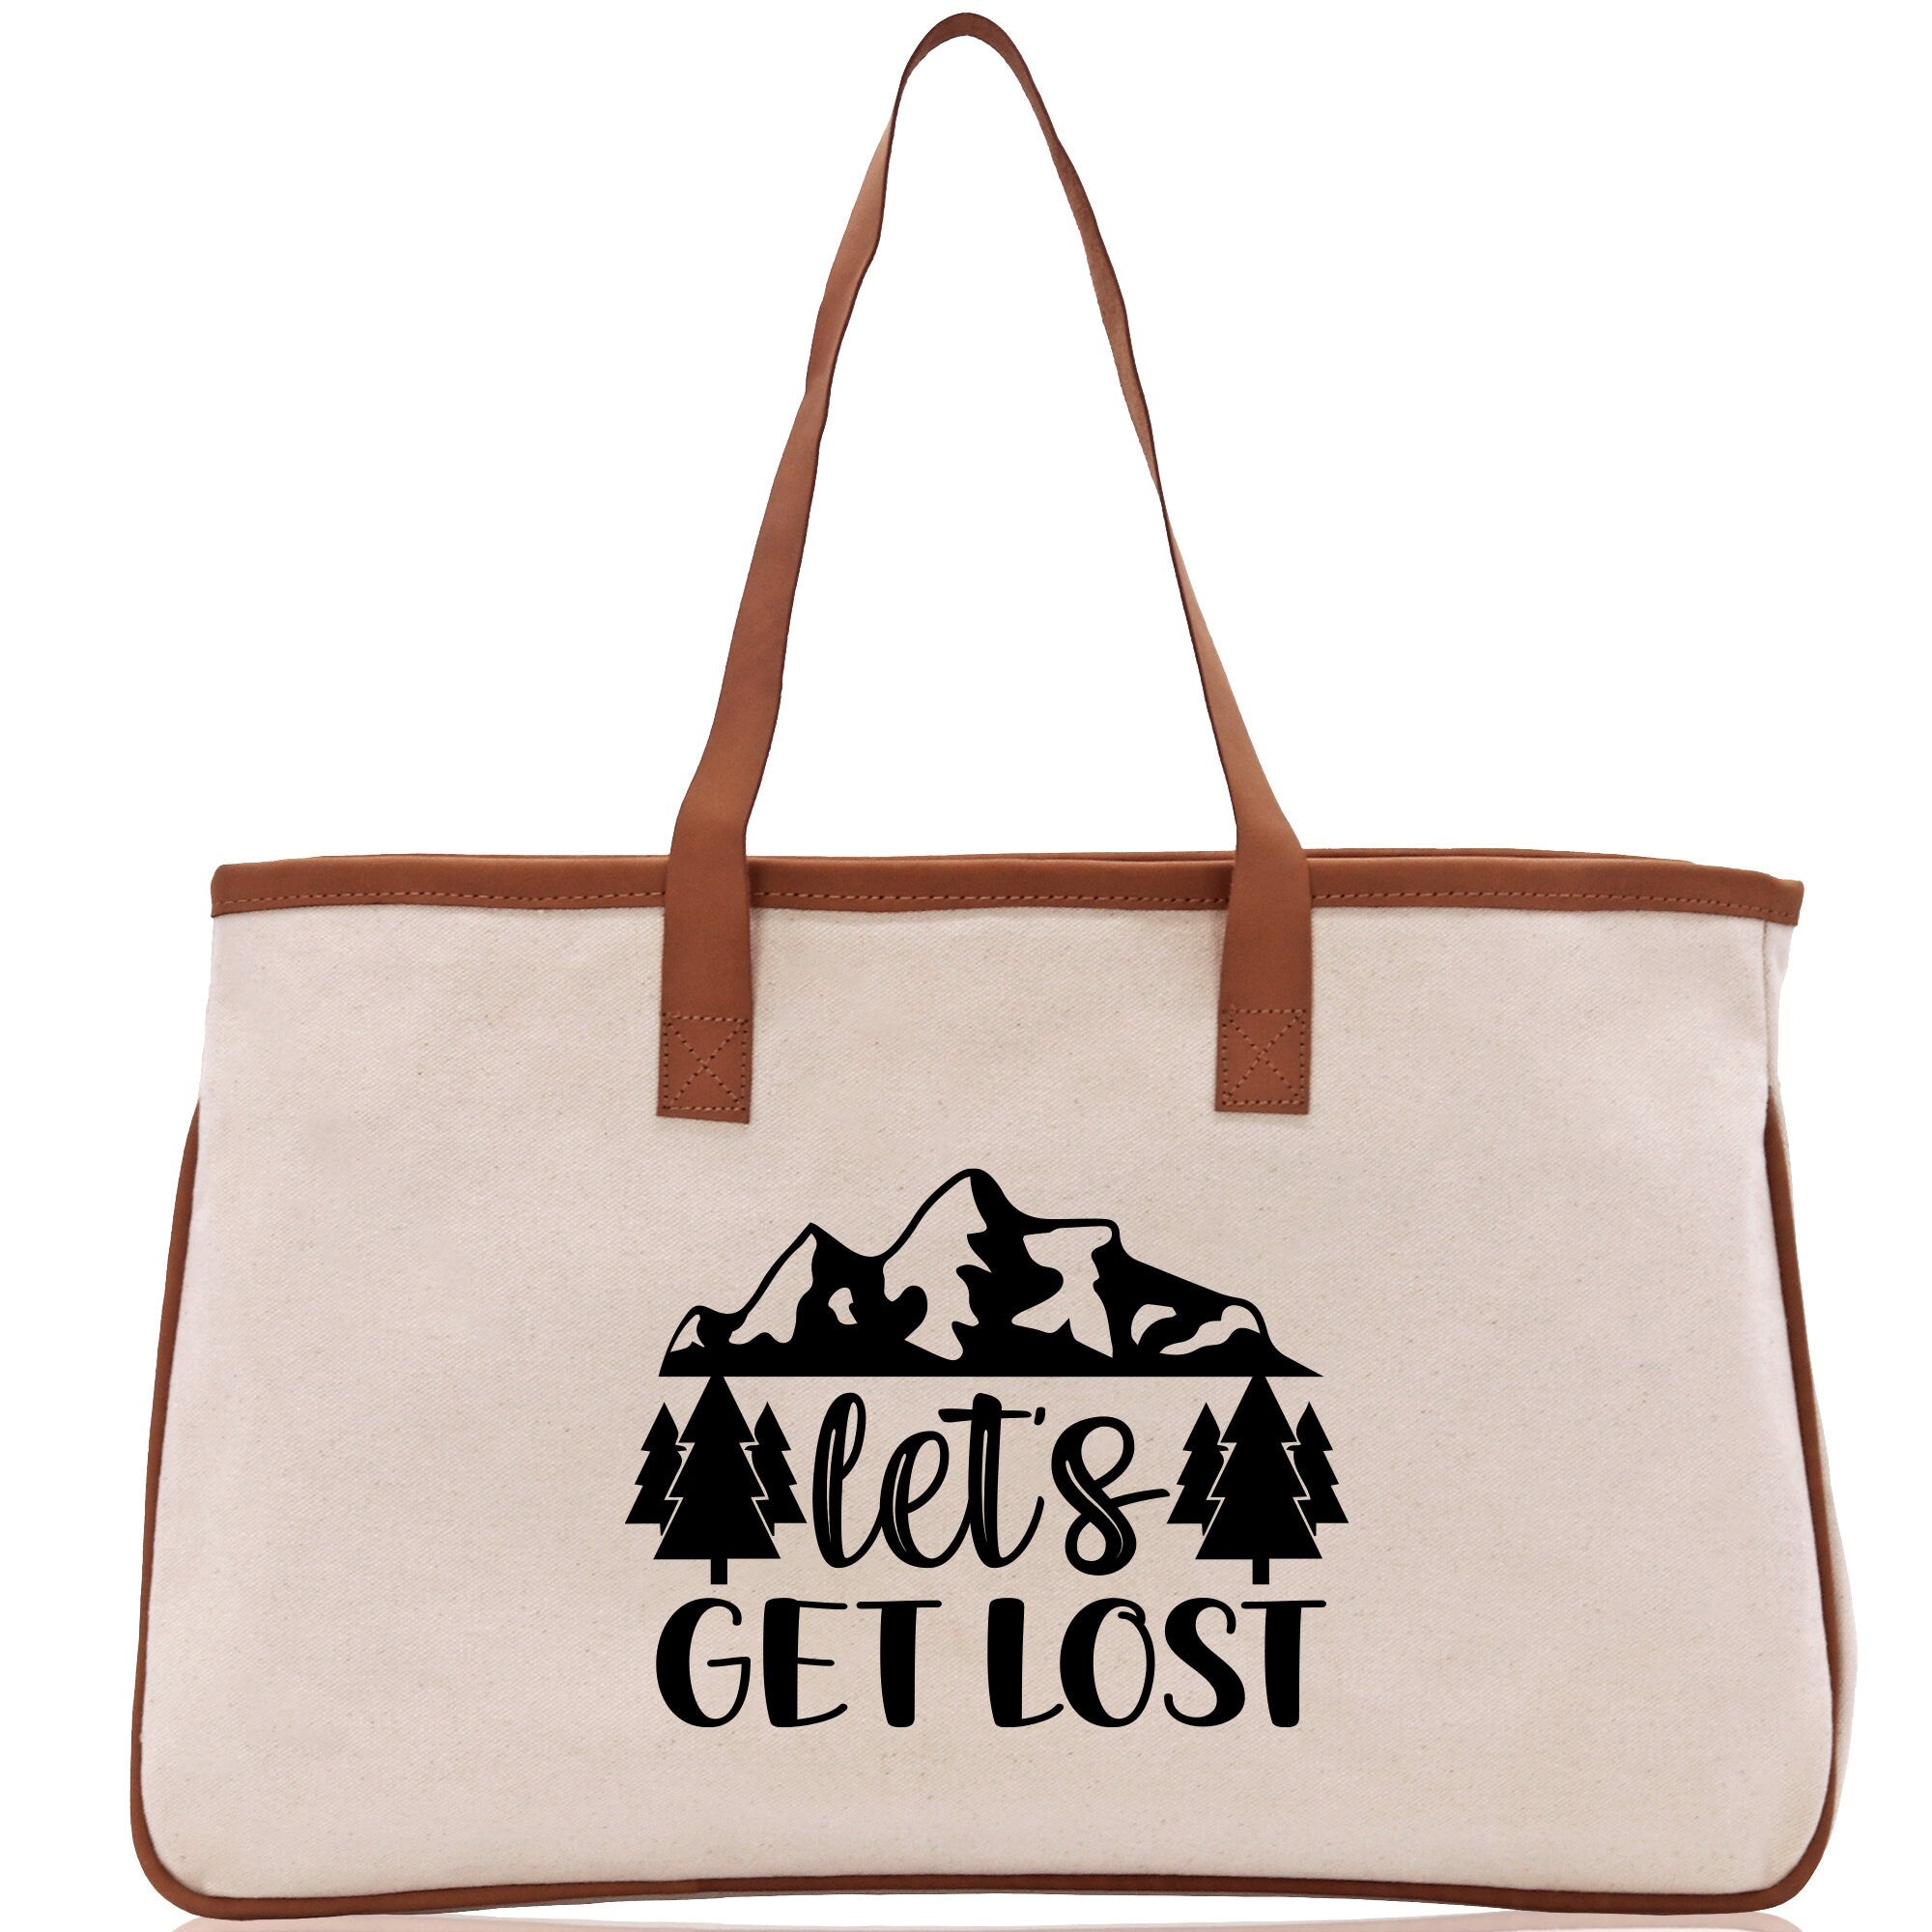 Let's Get Lost Cotton Canvas Chic Tote Bag Camping Tote Camping Lover Gift Tote Bag Outdoor Tote Multipurpose Weekender Tote Camper Tote